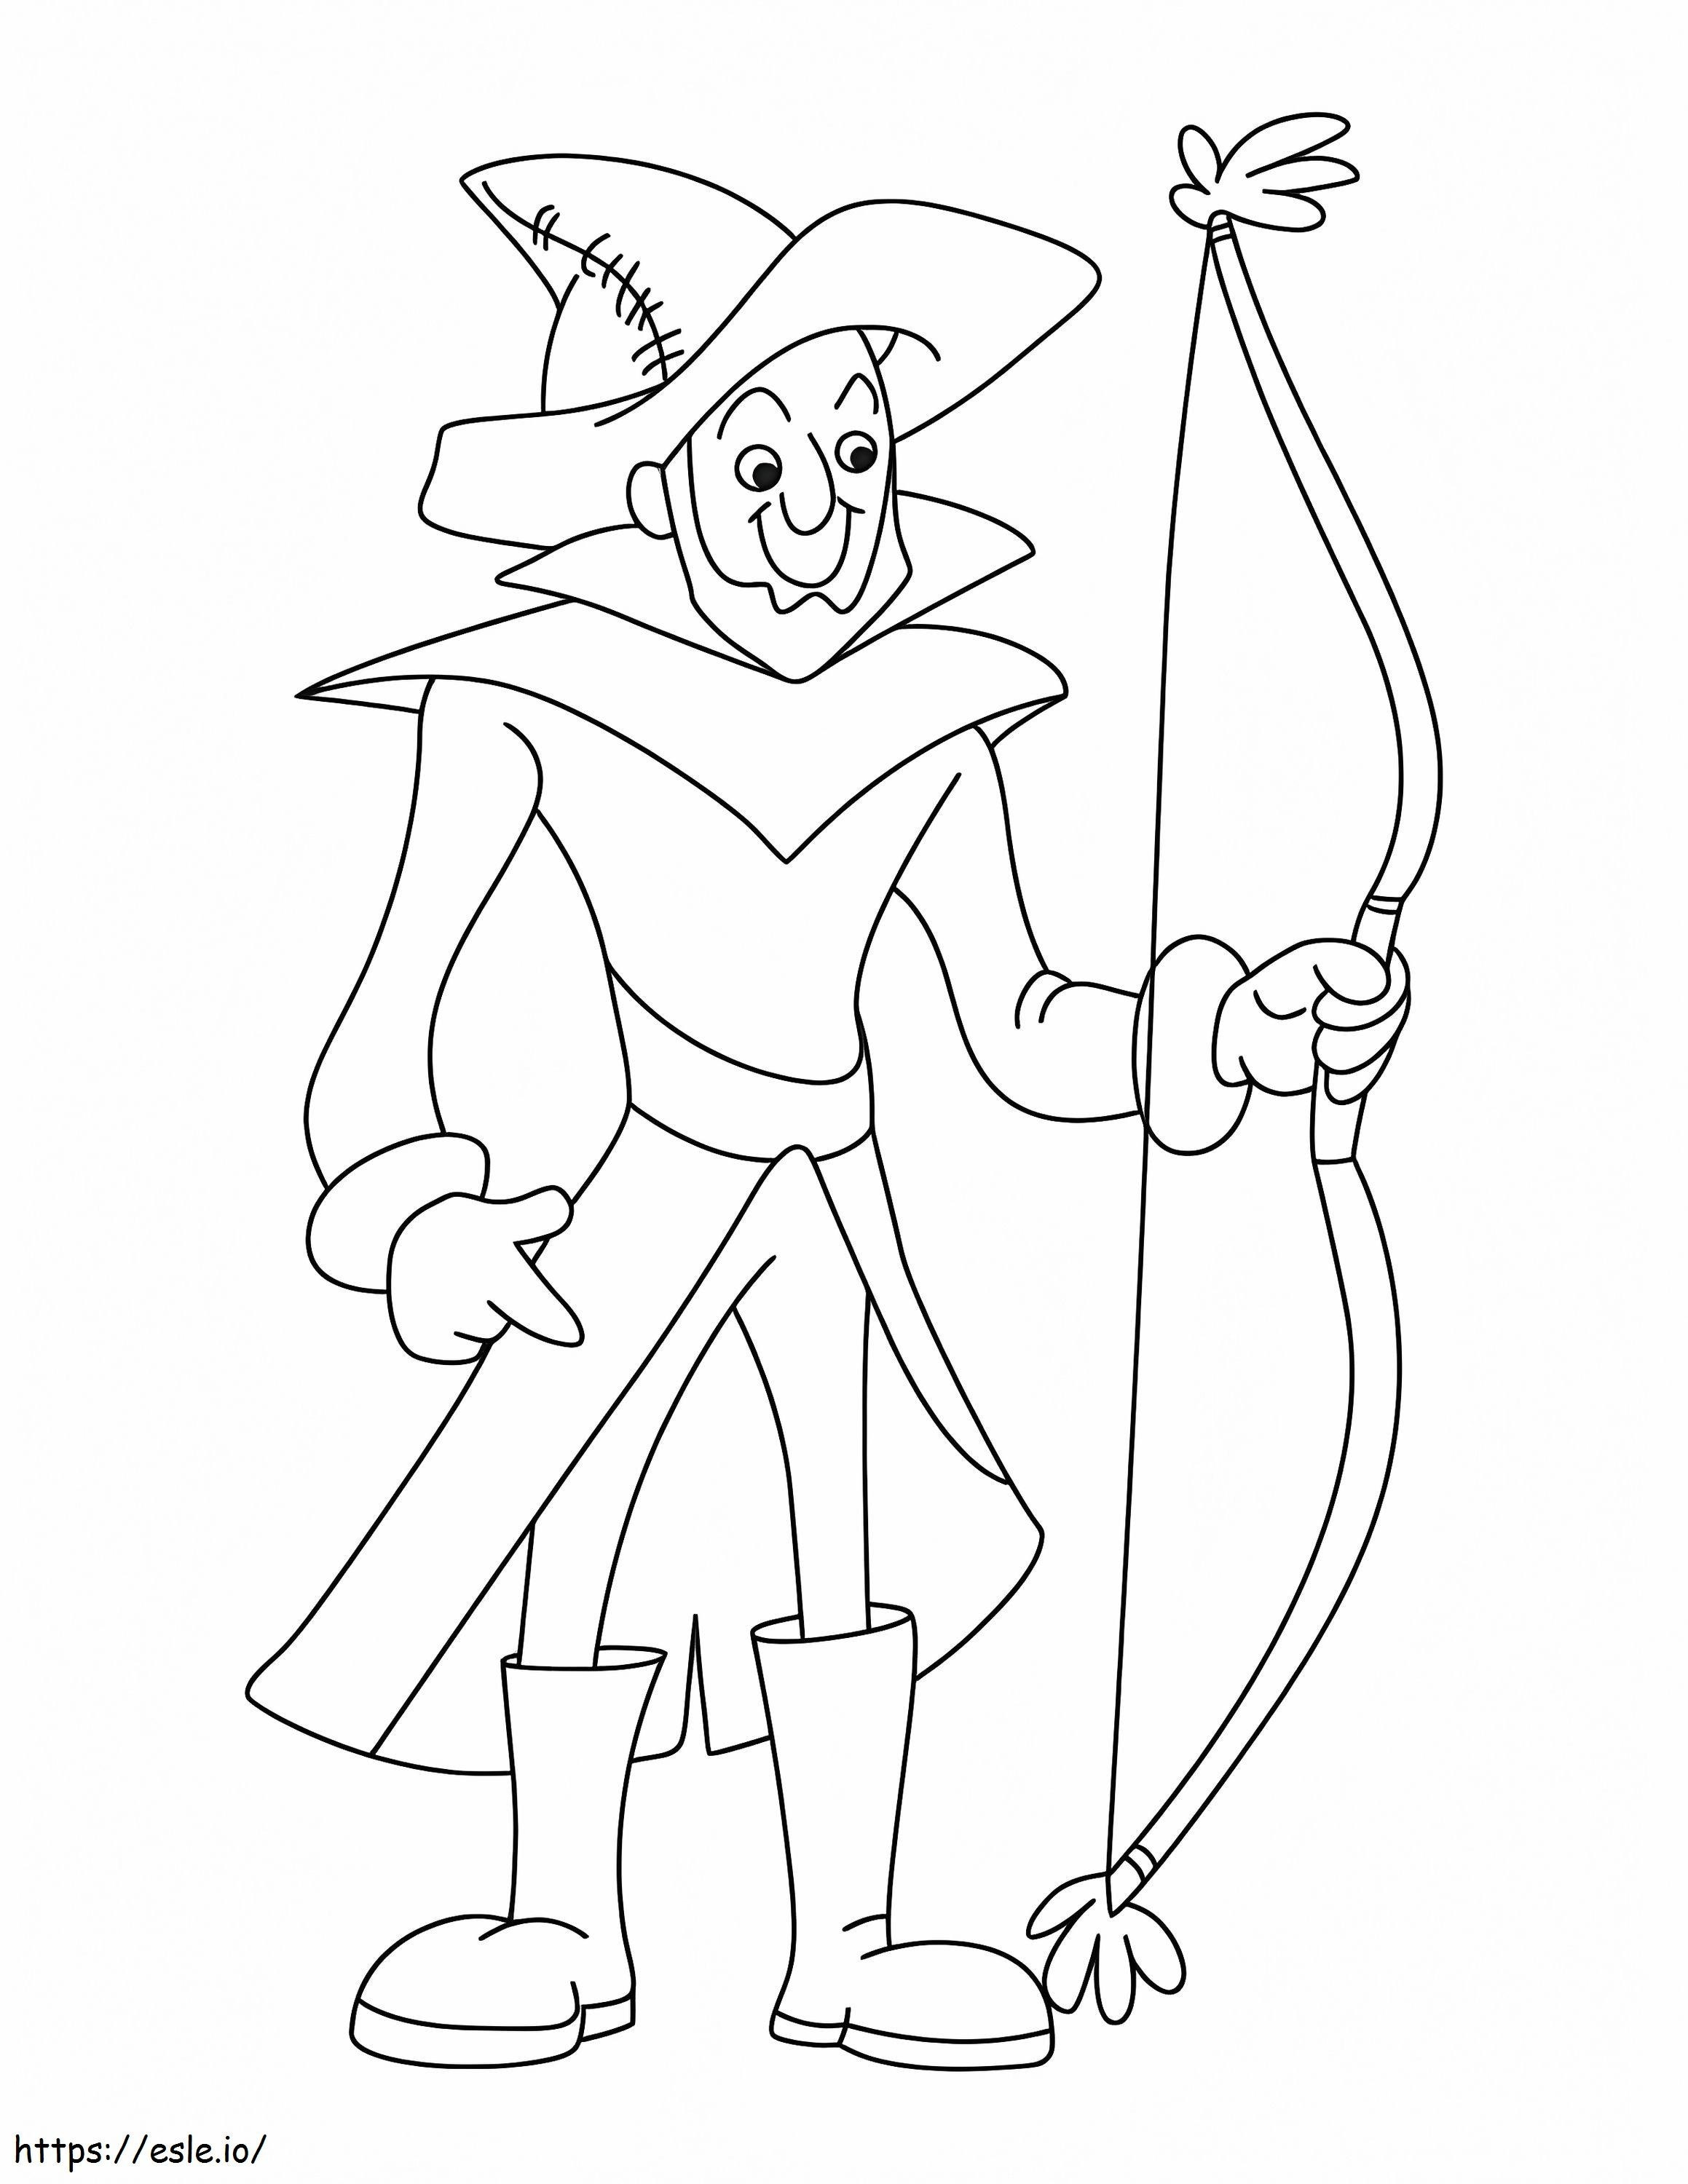 Witch Archery coloring page